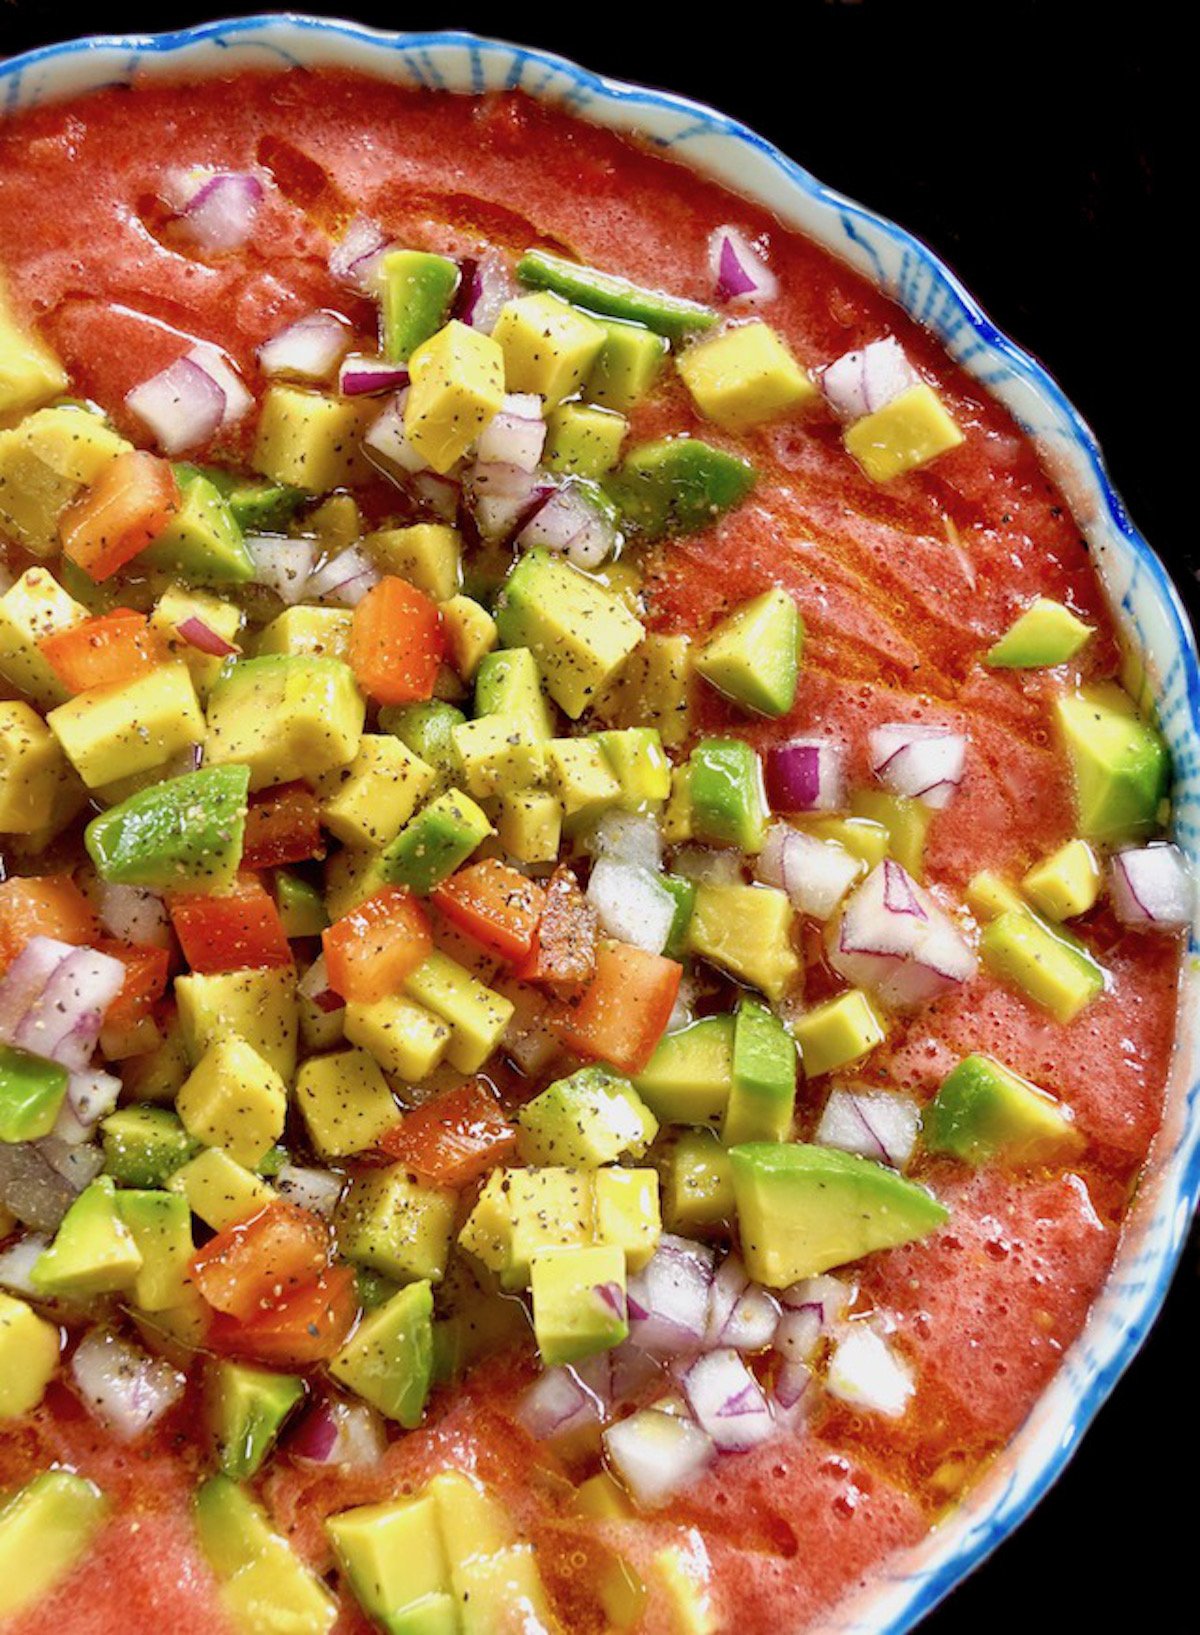 Top view of tomato gazpacho with tons of toppings including avocado, tomato and red onion.